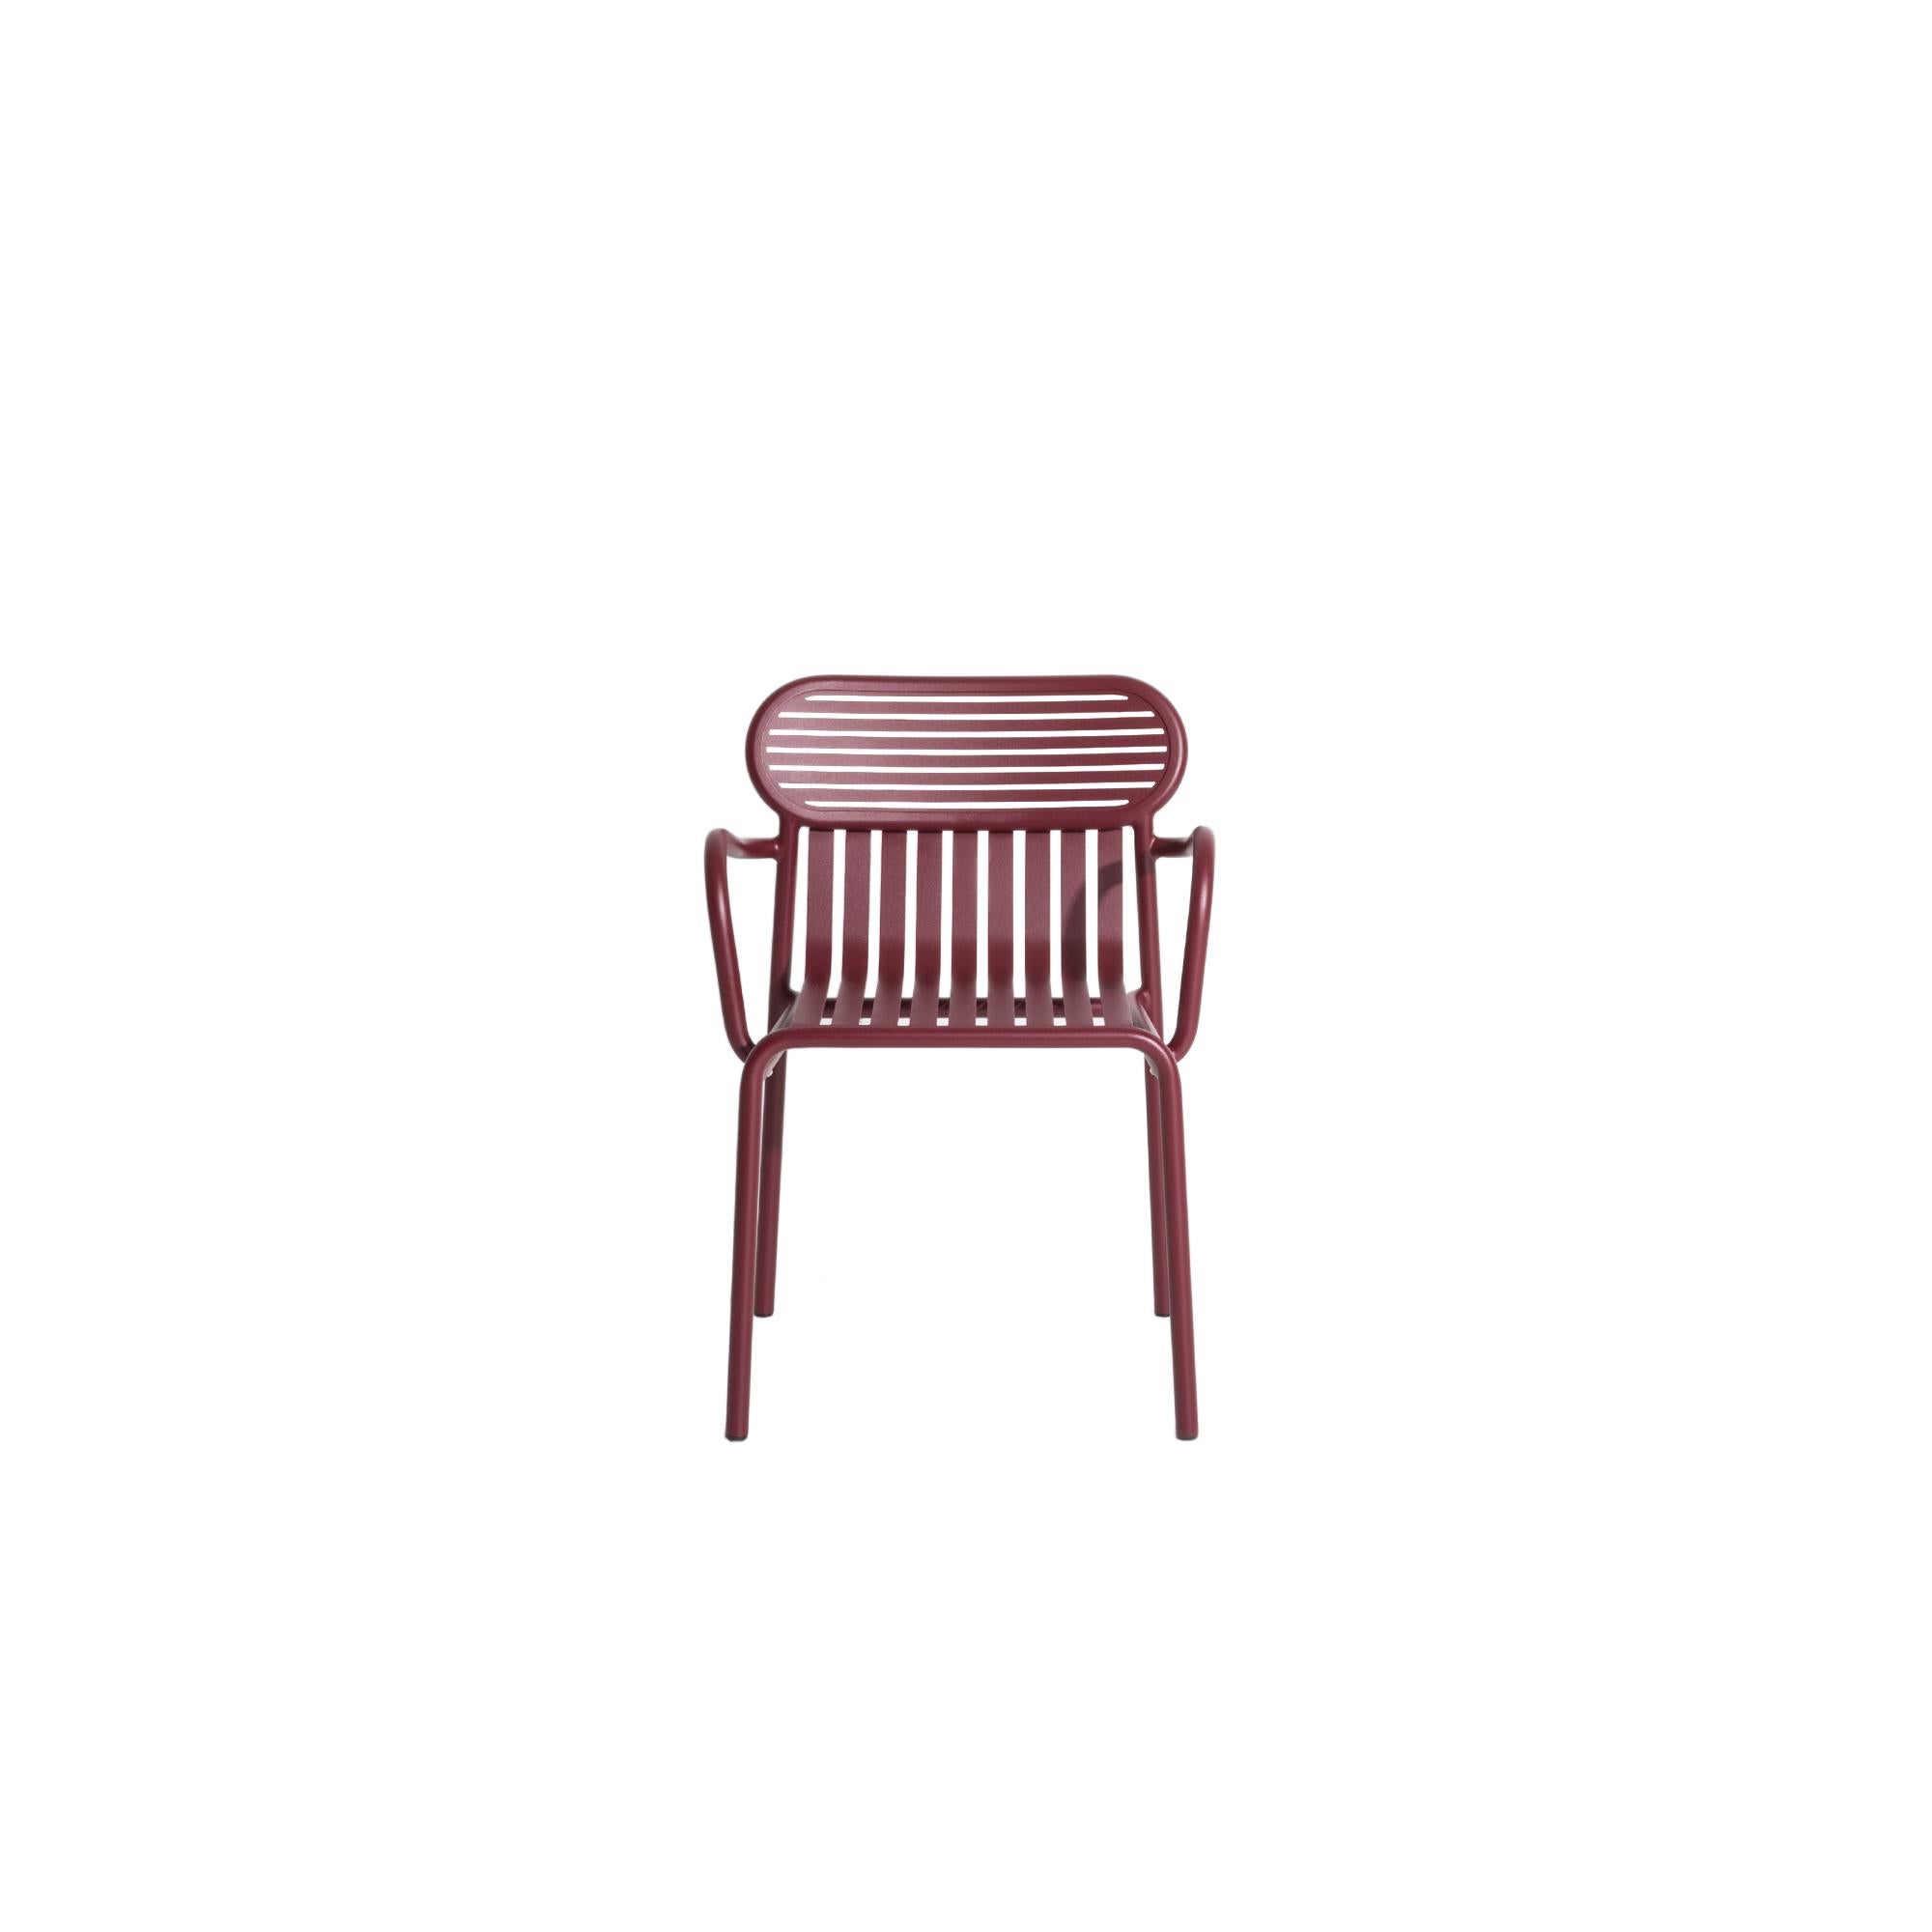 Petite Friture Week-End Bridge Chair in Burgundy Aluminium by Studio BrichetZiegler, 2017

The week-end collection is a full range of outdoor furniture, in aluminium grained epoxy paint, matt finish, that includes 18 functions and 8 colours for